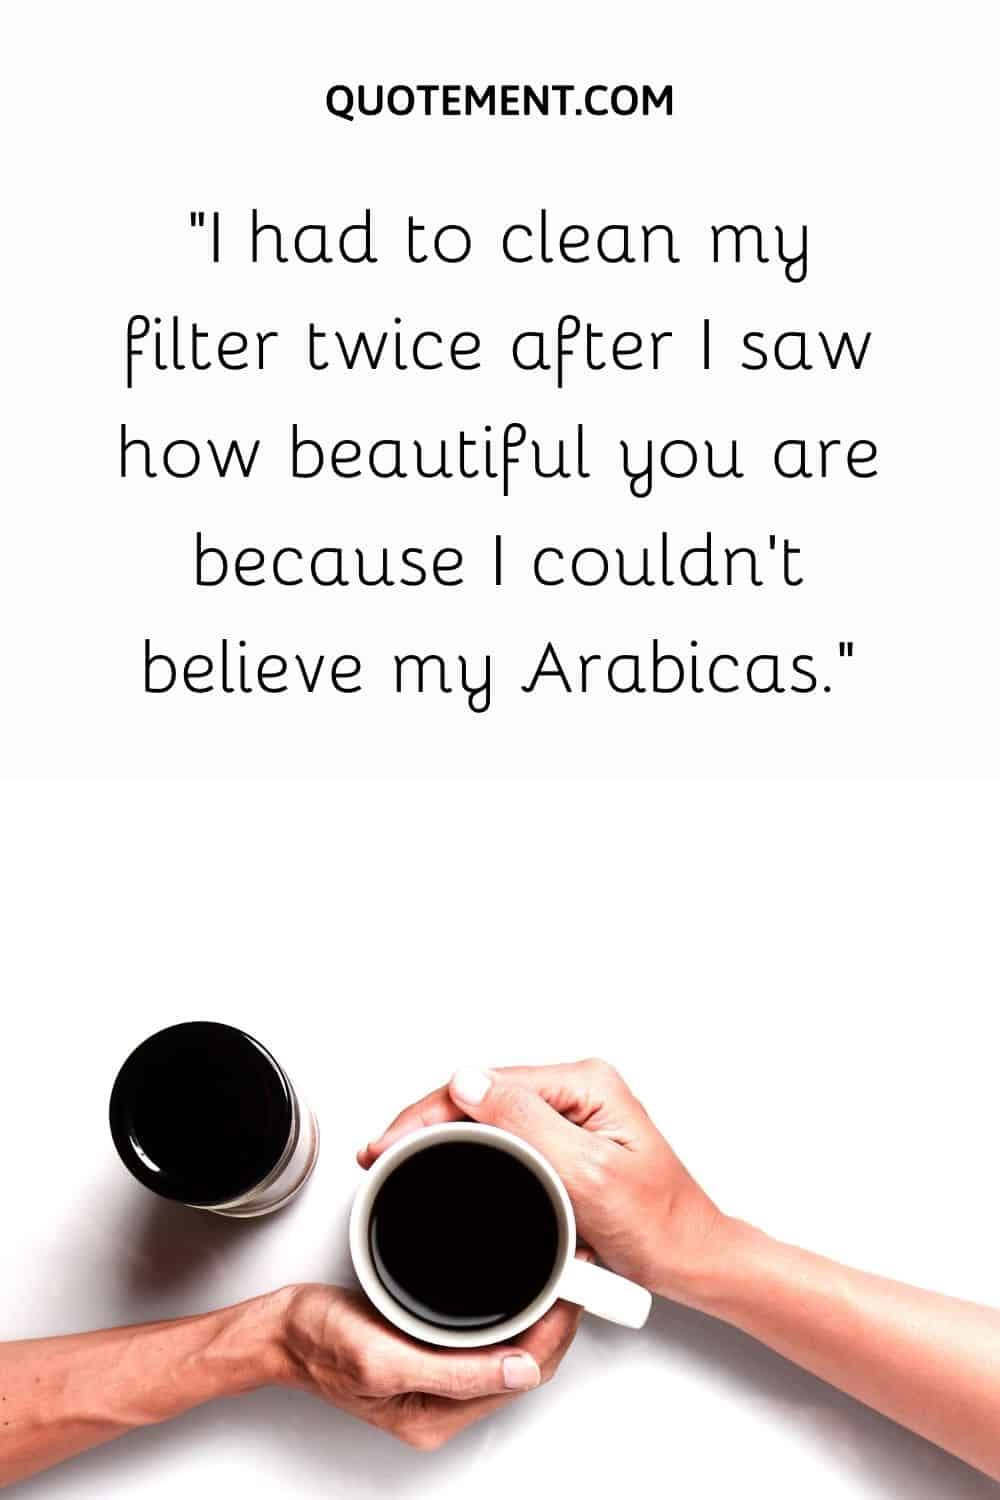 I had to clean my filter twice after I saw how beautiful you are because I couldn’t believe my Arabicas